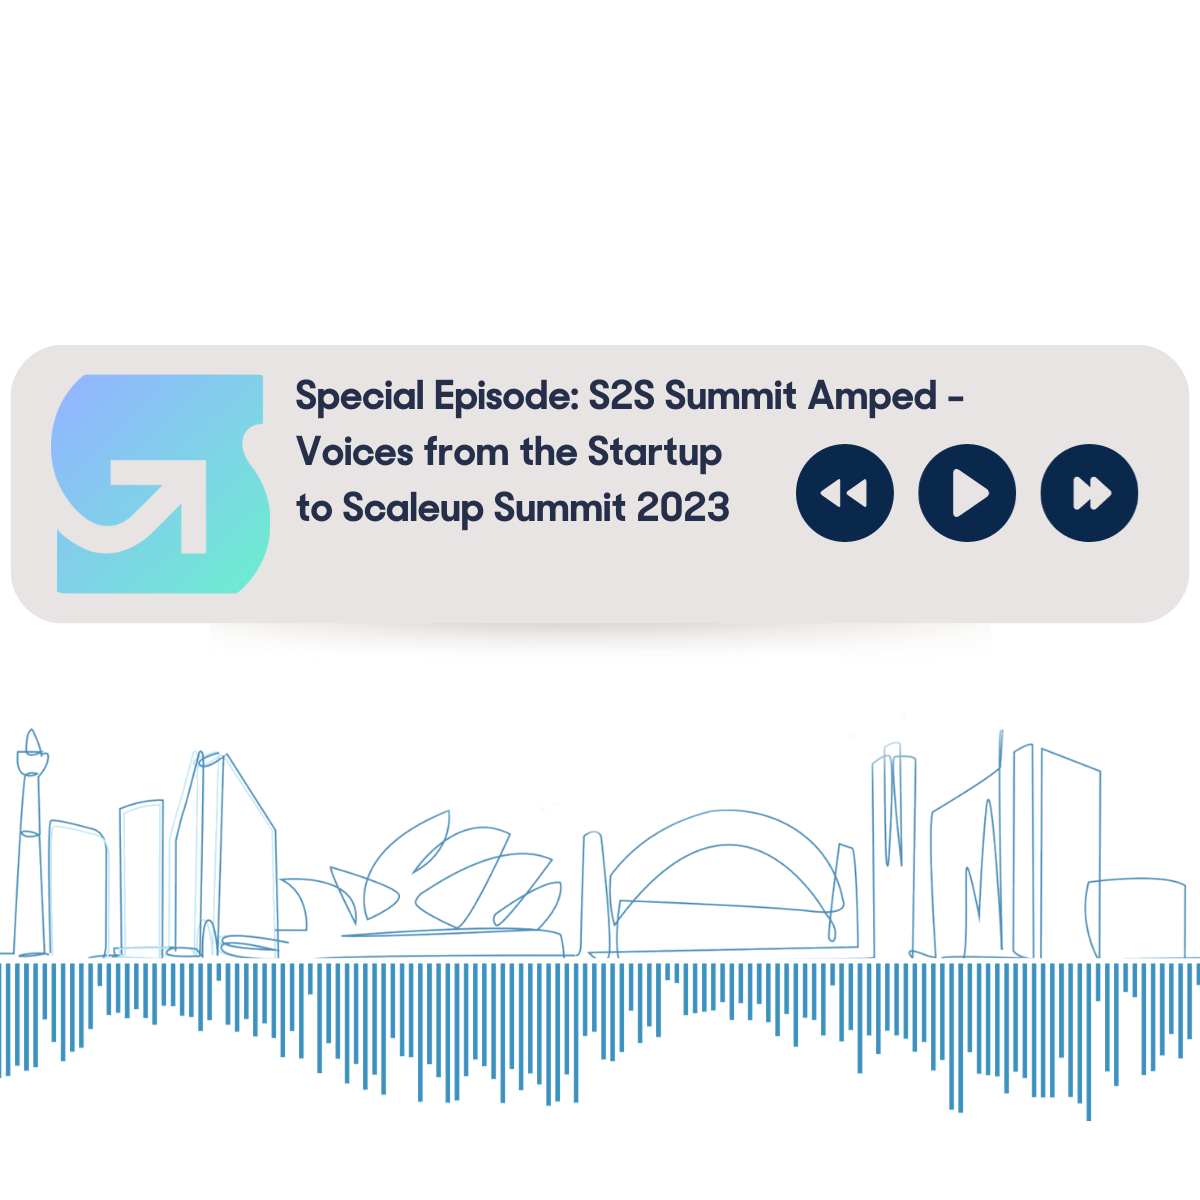 Special Episode: S2S Summit Amped - Voices from the Startup to Scaleup Summit 2023